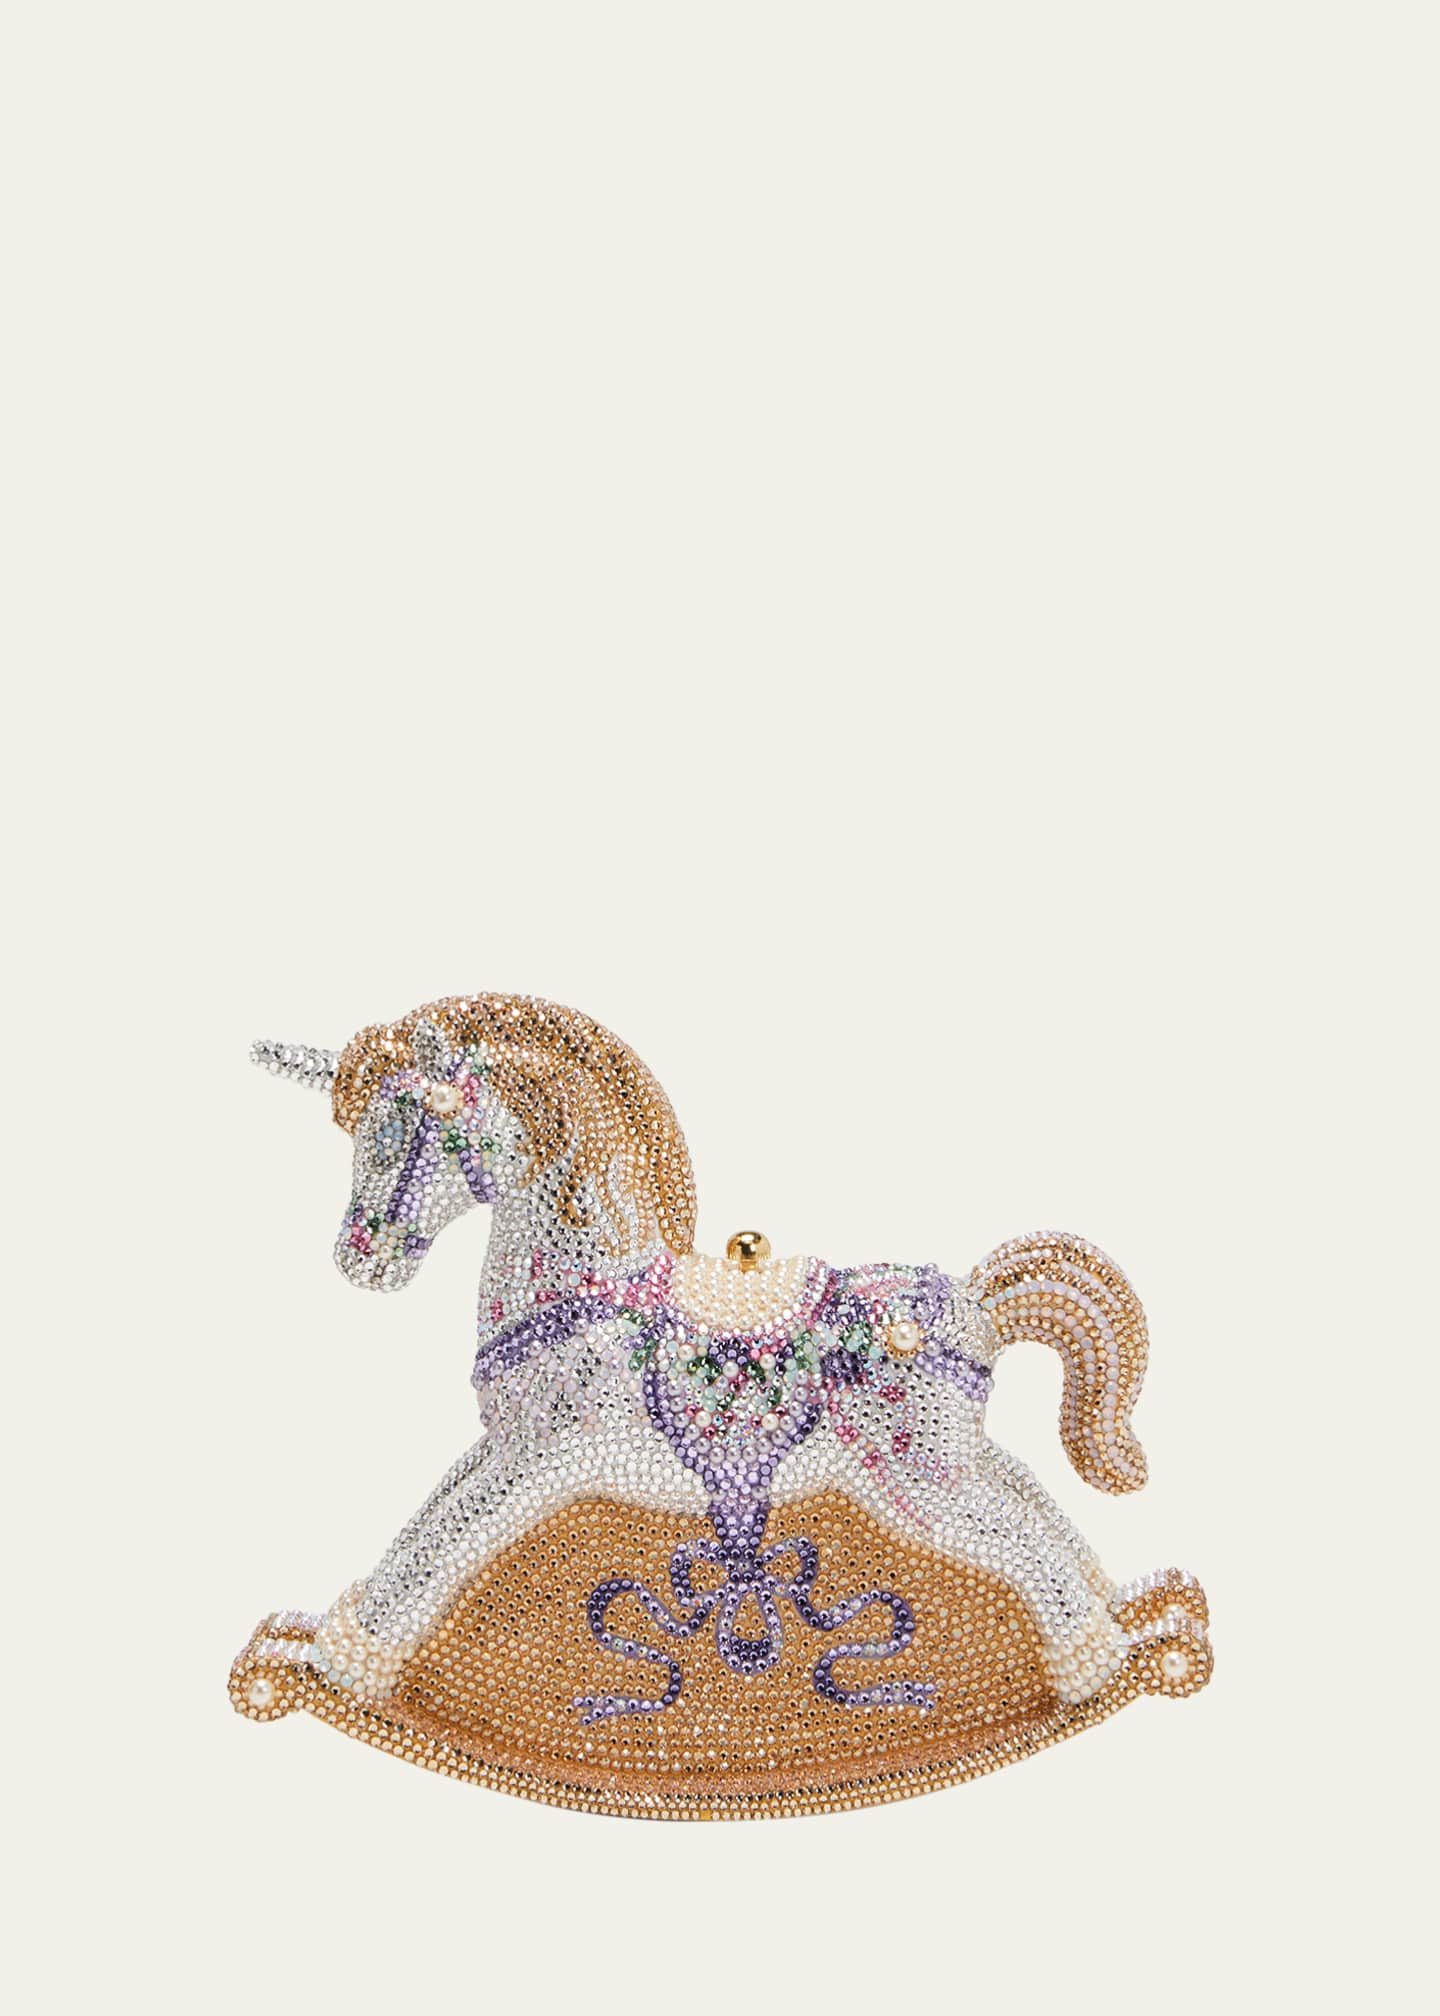 Judith Leiber Couture Willow Rocking Horse Crystal Minaudiere Image 1 of 5